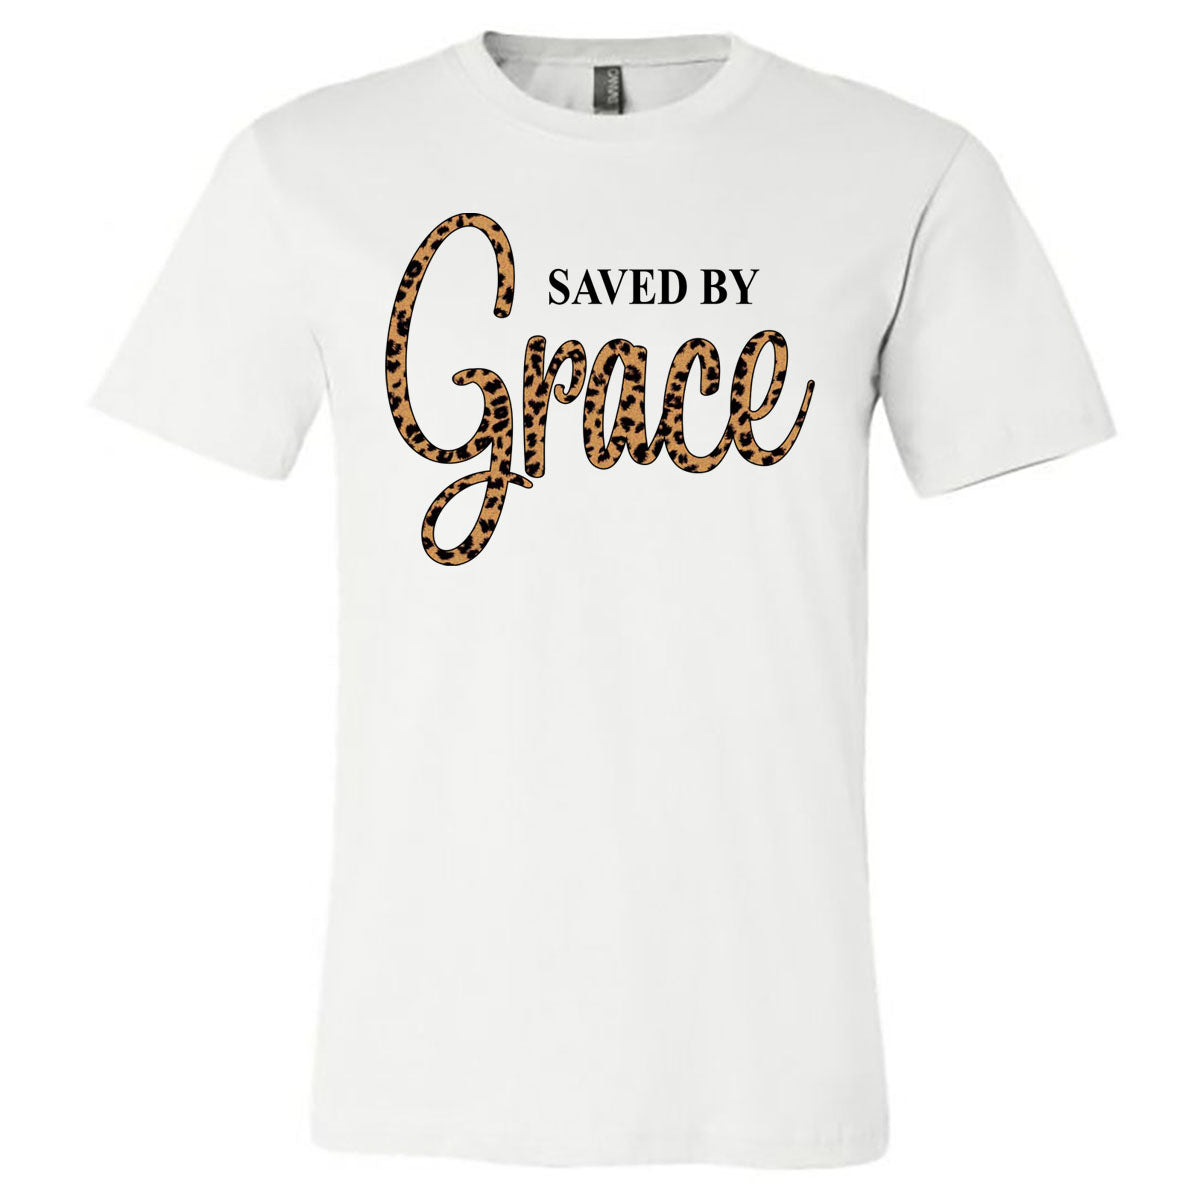 Saved By Grace - White Short Sleeve Tee - Southern Grace Creations